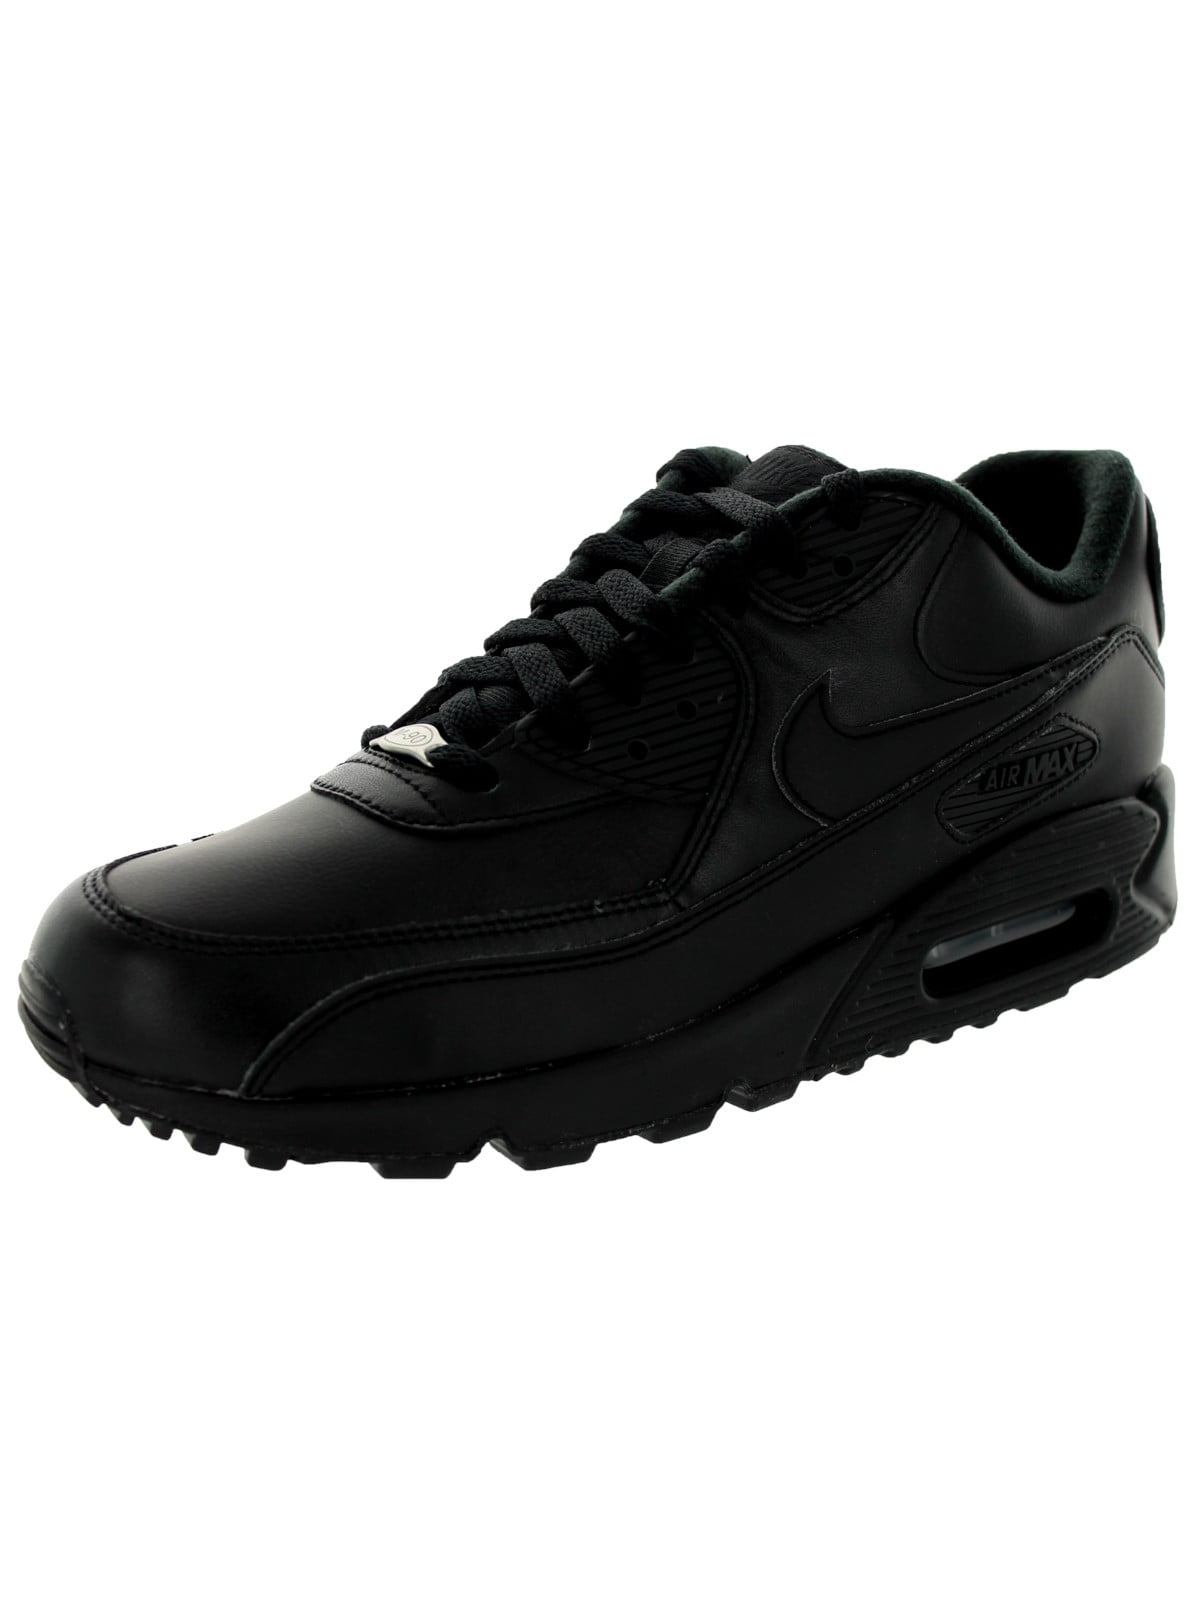 Nike Mens Air Max 90 Leather Running 